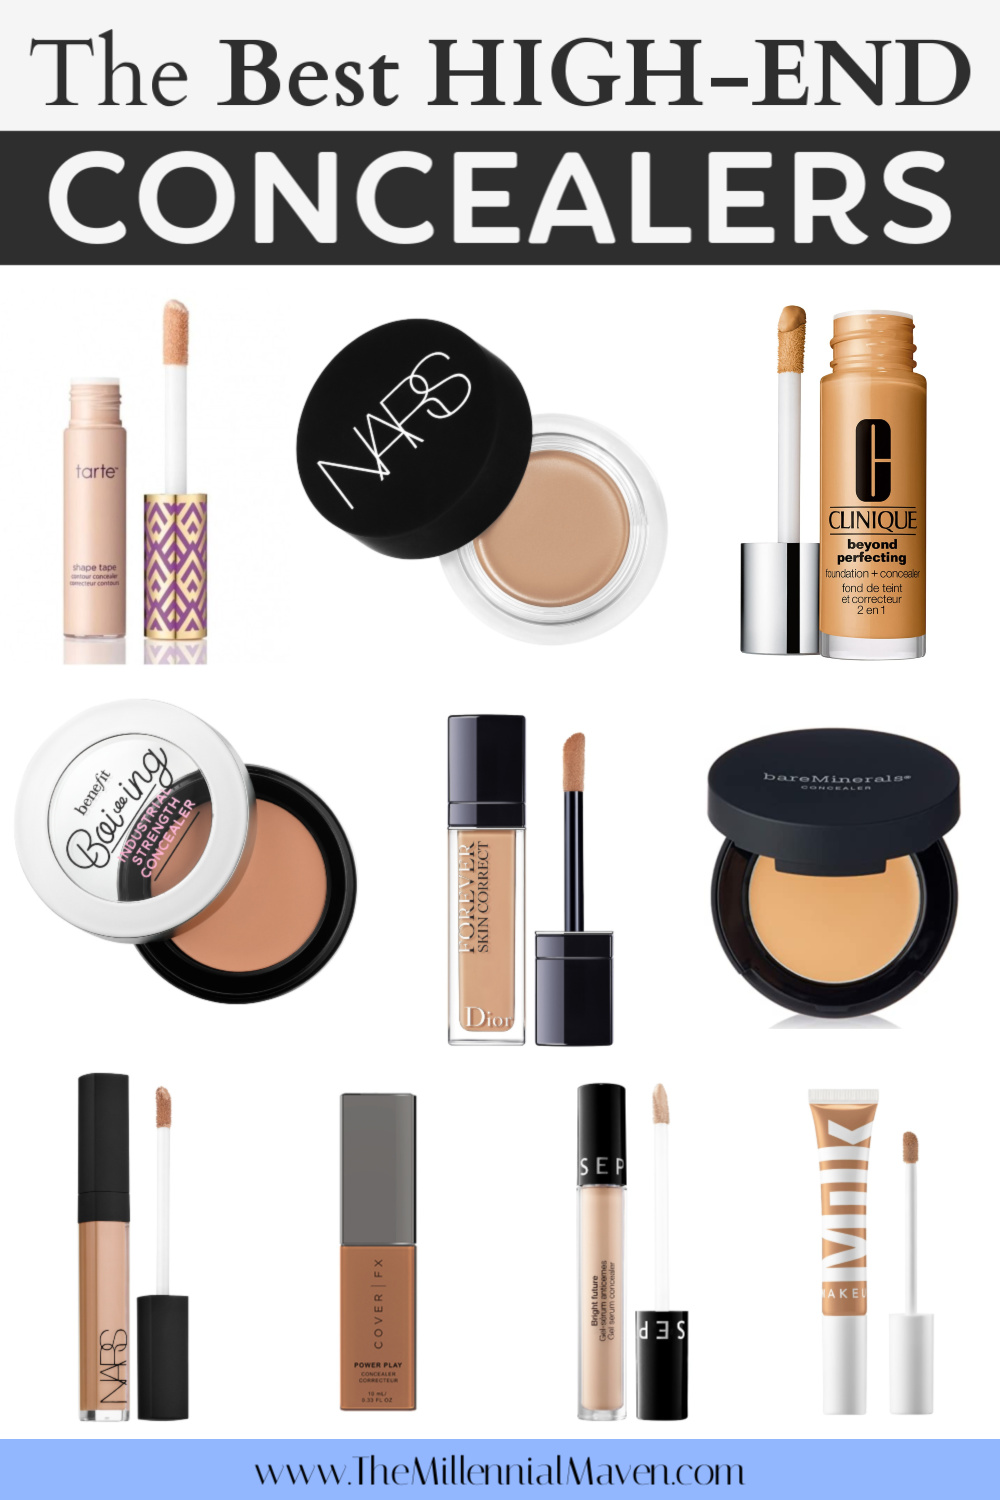 Top High-End Concealers For All Skin Types | Best Concealers 2020 | Millennial Maven